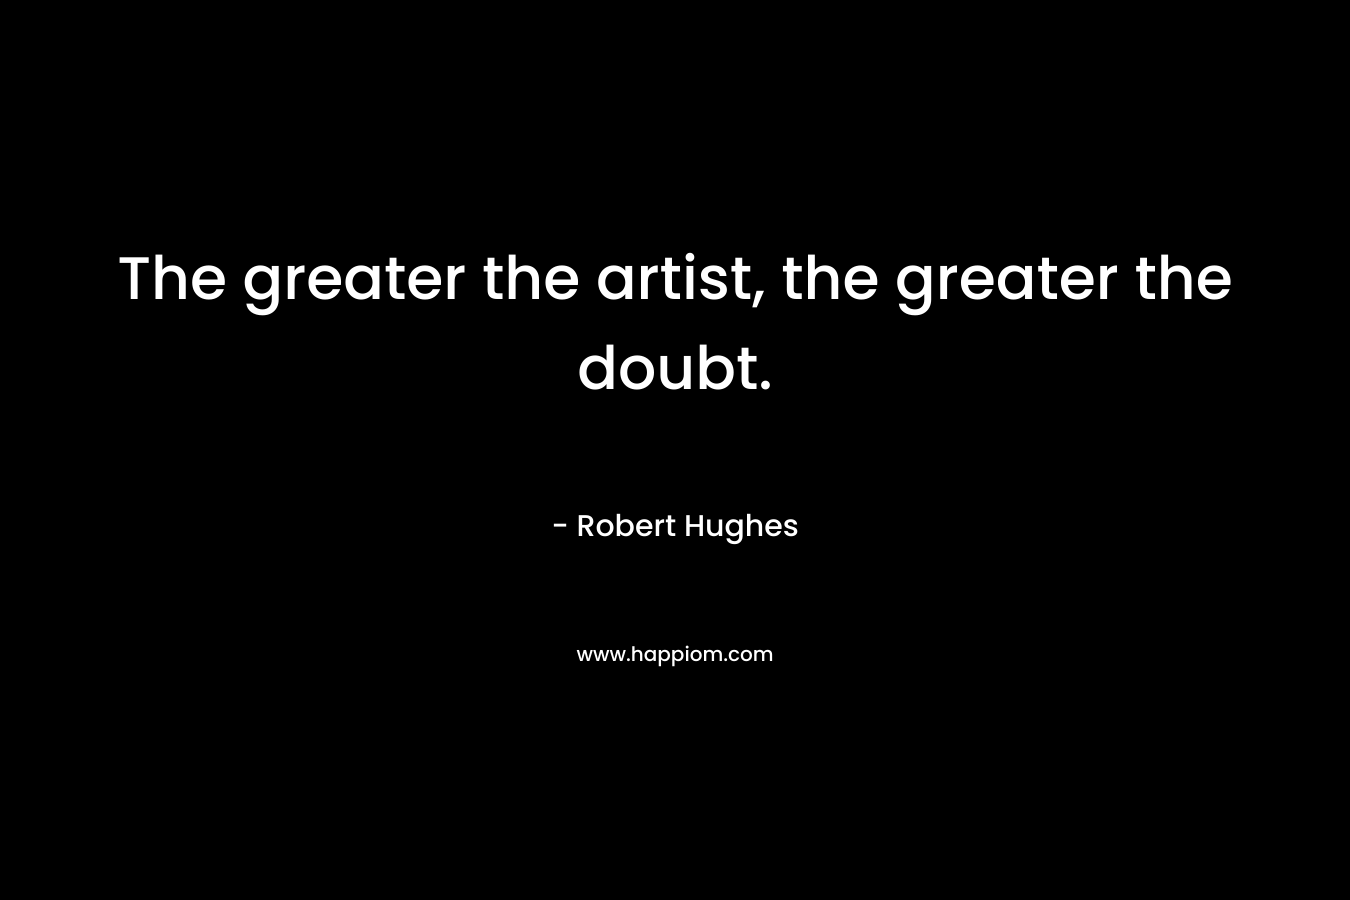 The greater the artist, the greater the doubt. – Robert Hughes